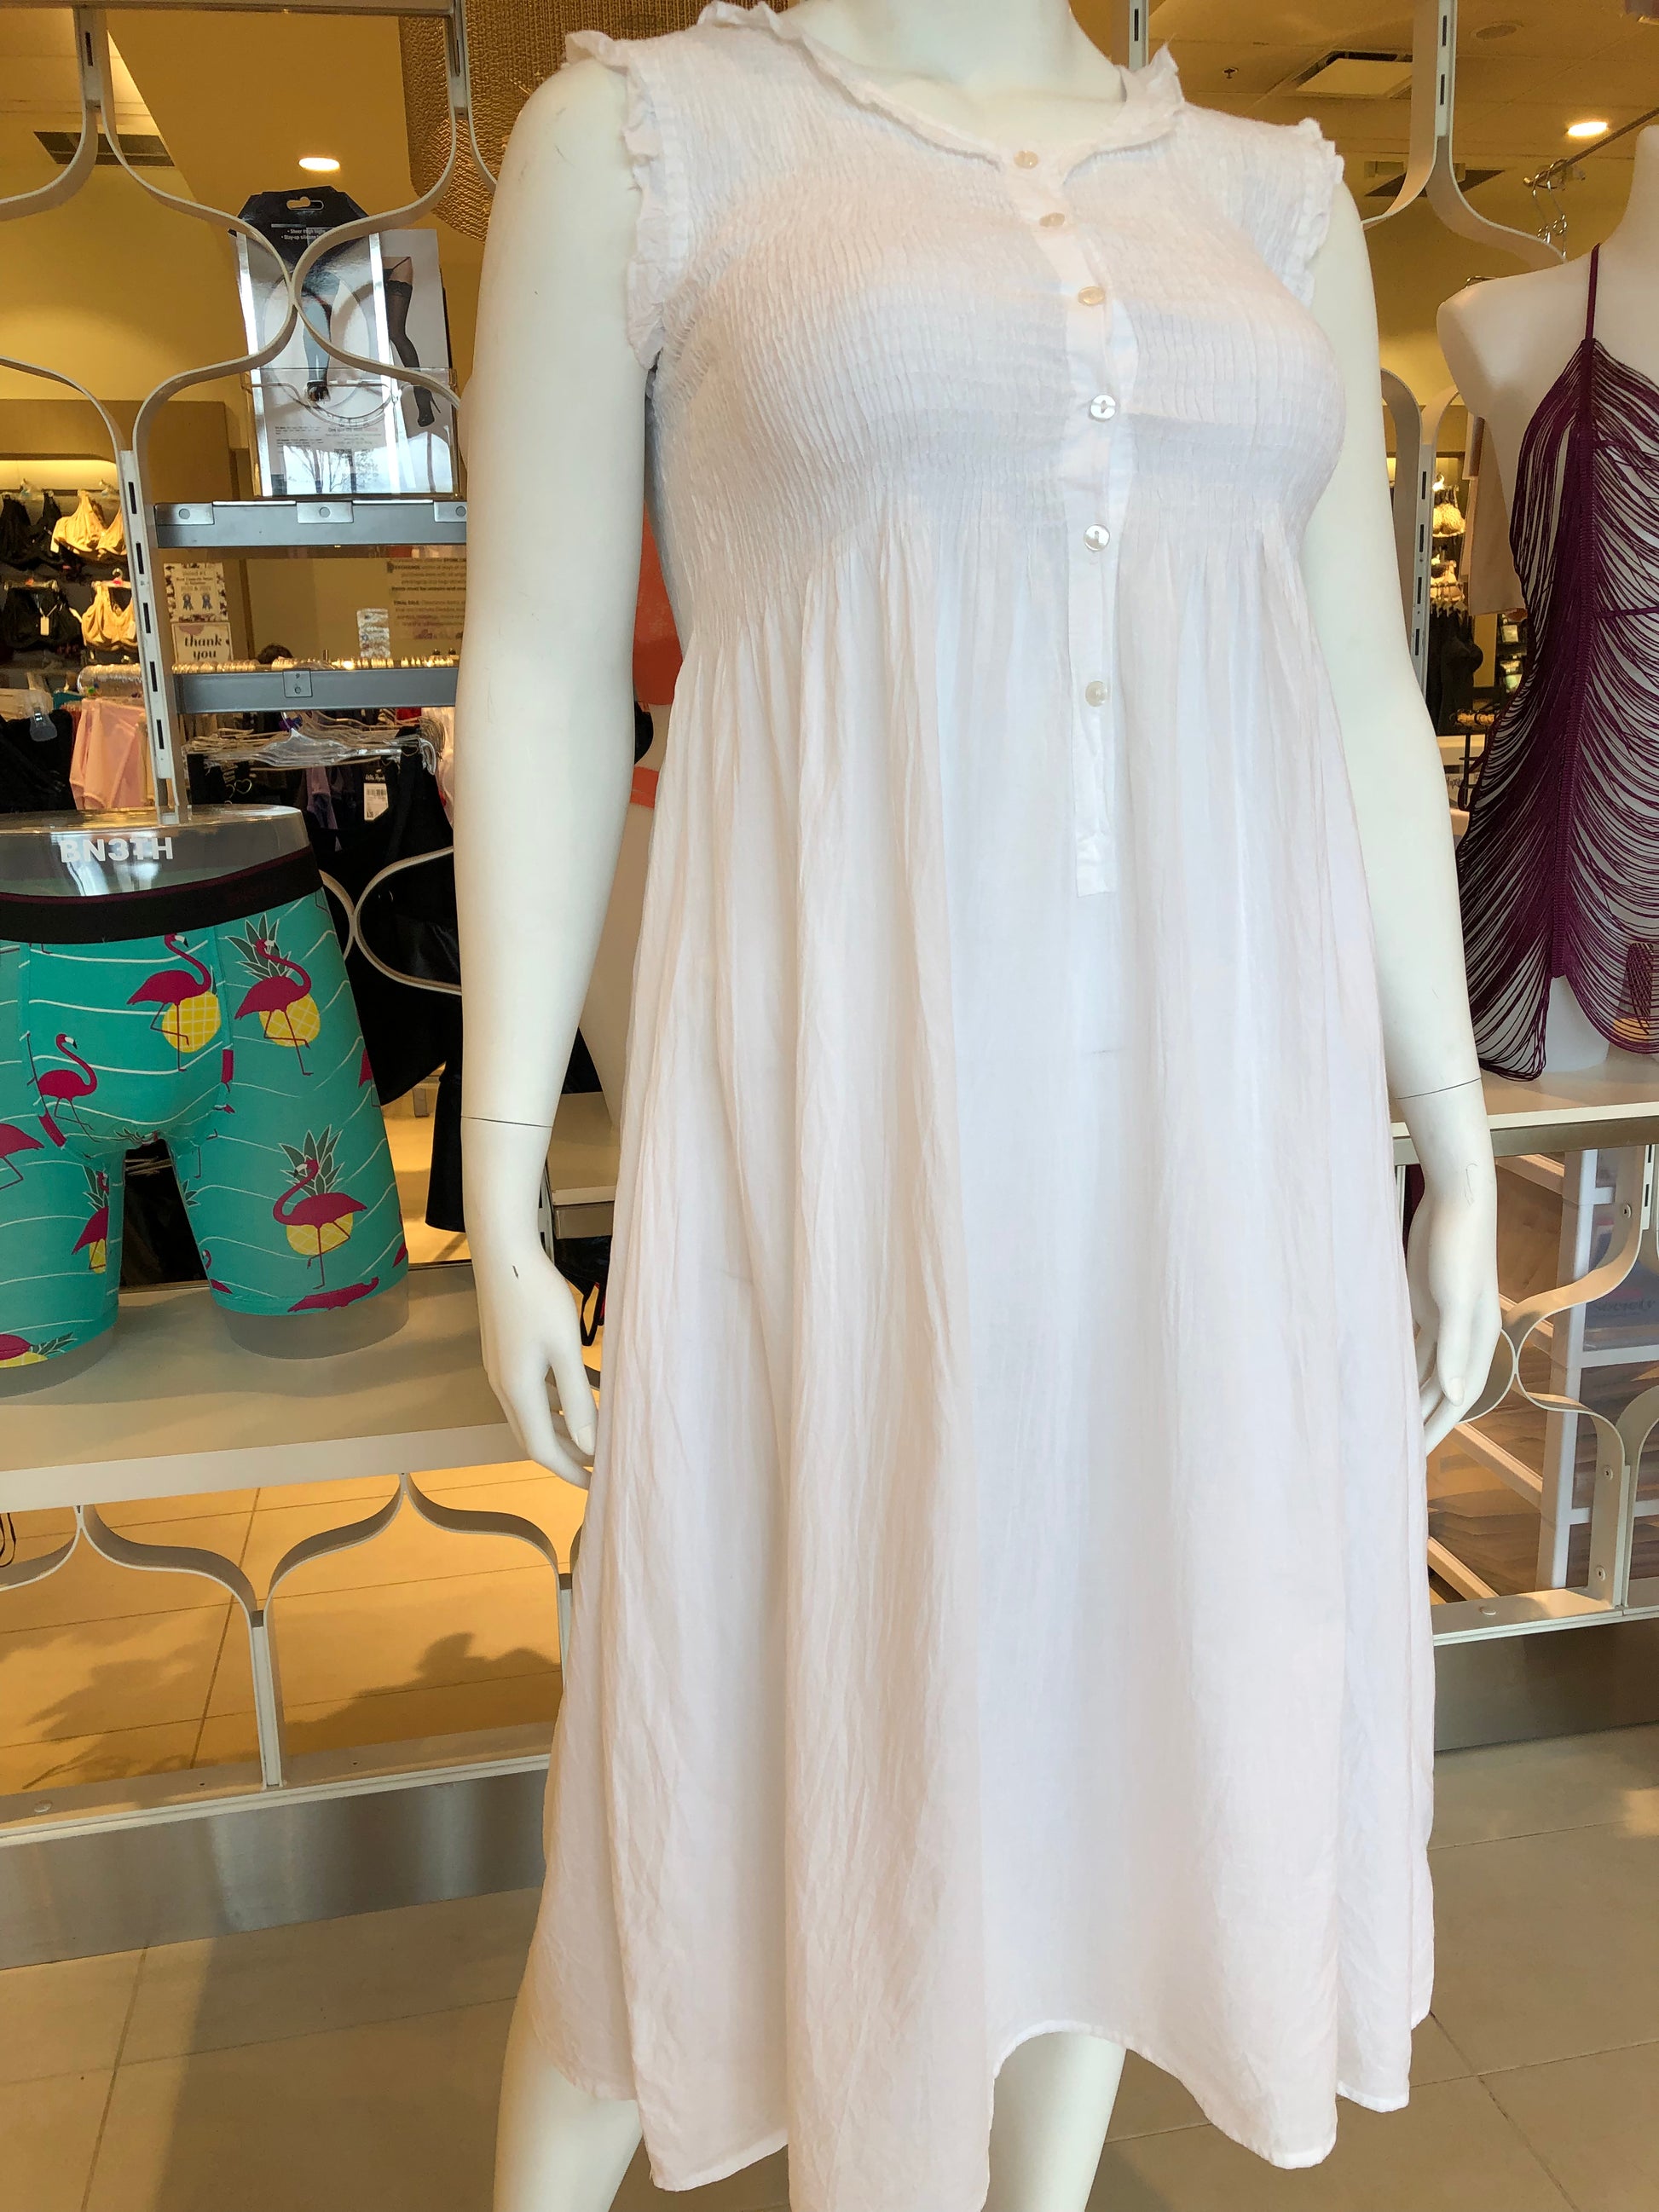 Cacique Sleepwear - Sleeveless Nightgown - White & Beige Striped - L  (14/16) for Sale in Bakersfield, CA - OfferUp